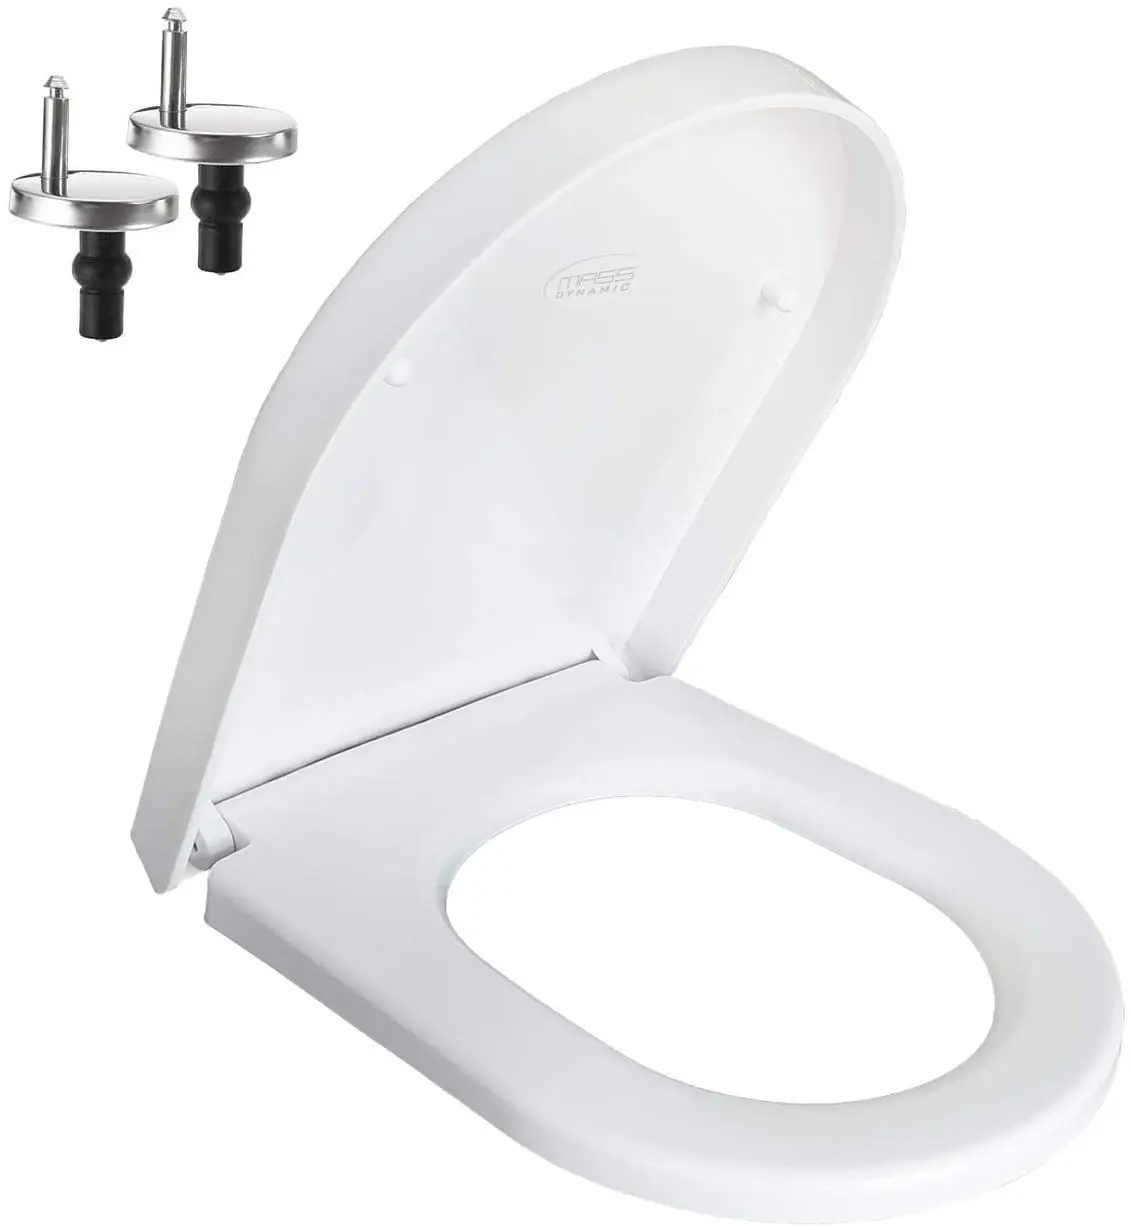 LUXURY WHITE D SHAPE HEAVY DUTY SOFT CLOSE TOILET SEAT WITH TOP FIXING HINGES 